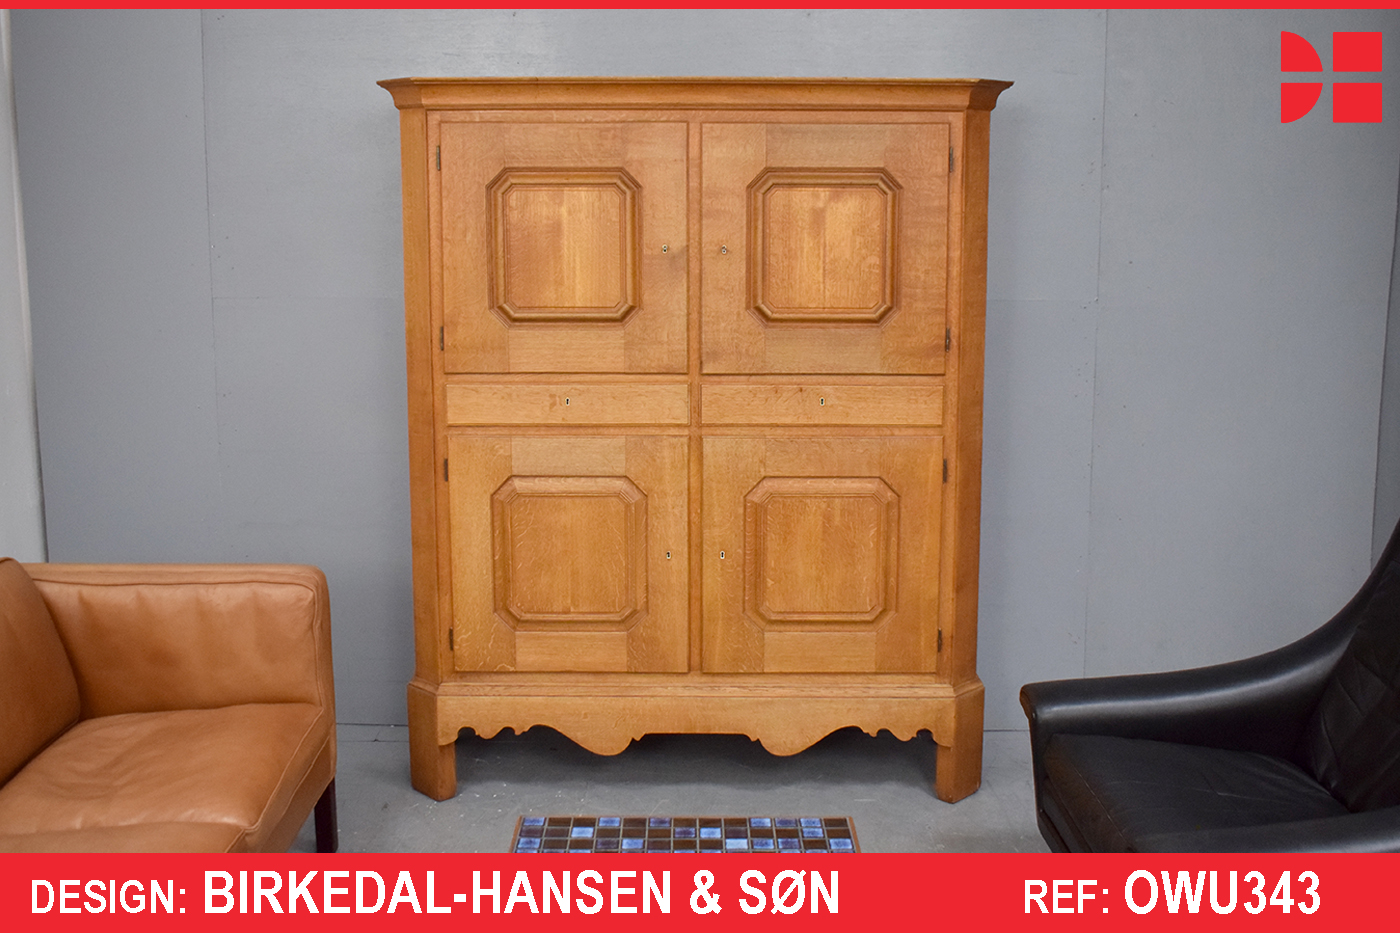 Large solid oak cabinet with locking doors and drawers | Birkedal-Hansen & Son